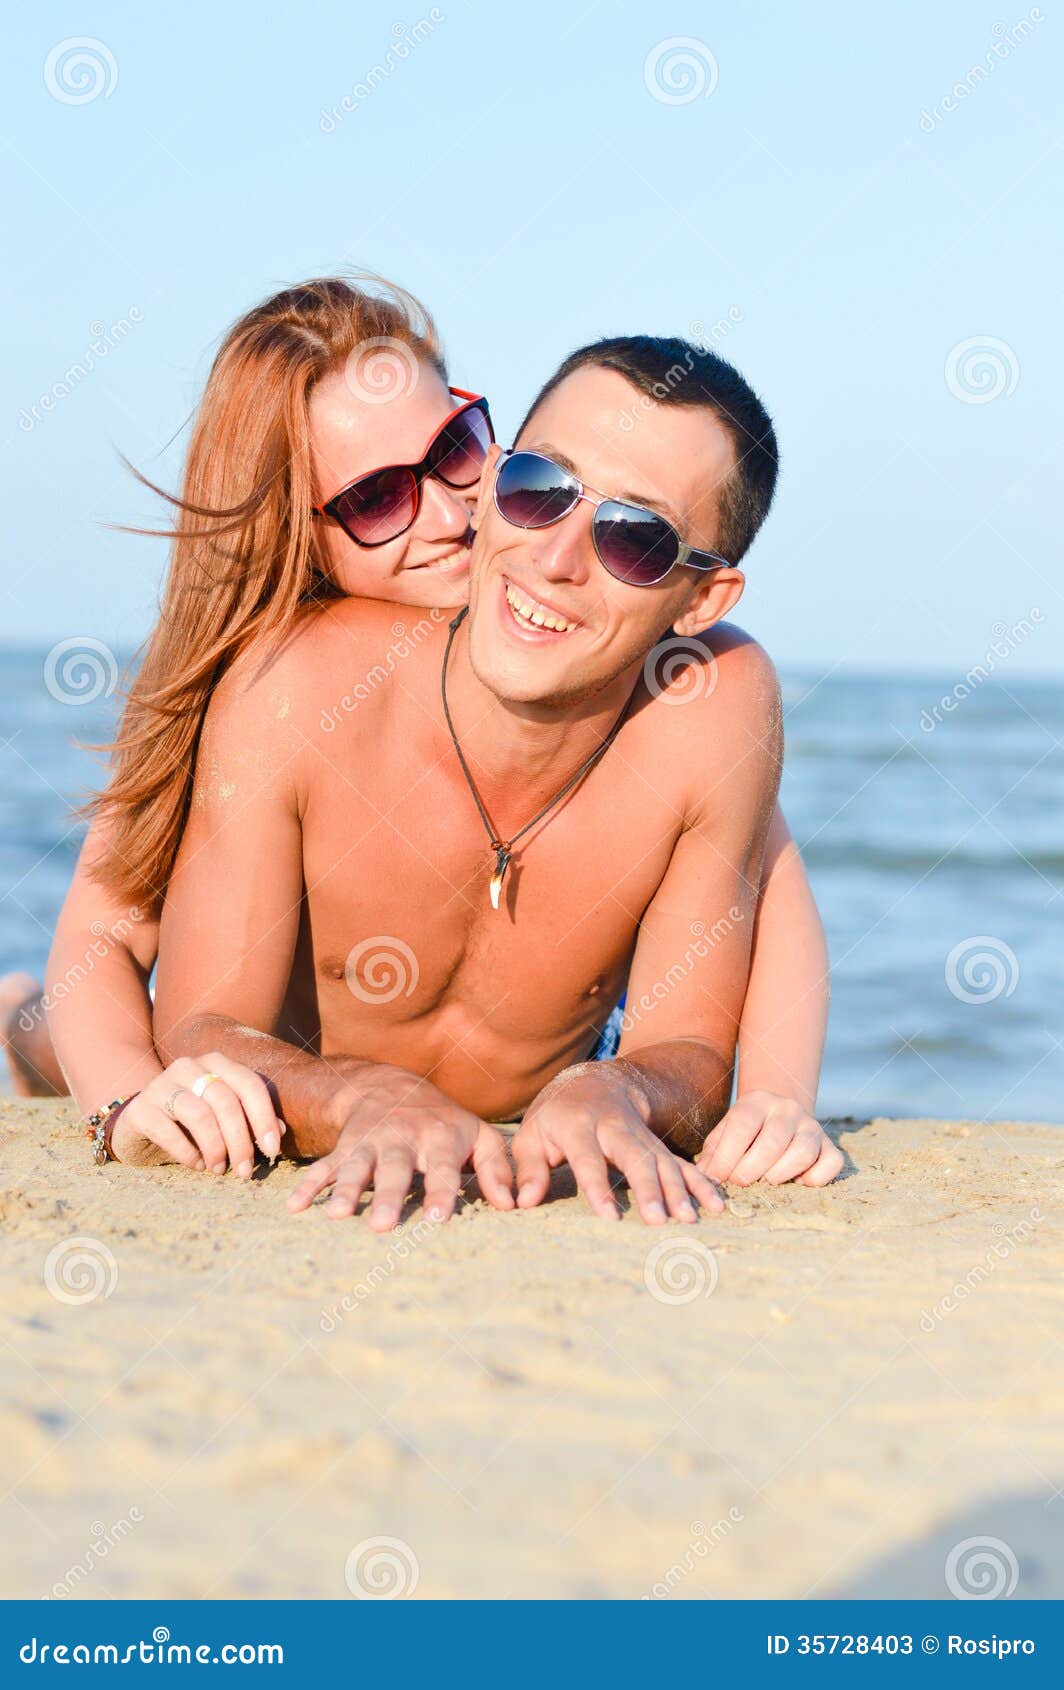 Young Happy Couple Man and Woman Lying on Sandy Beach Stock Image